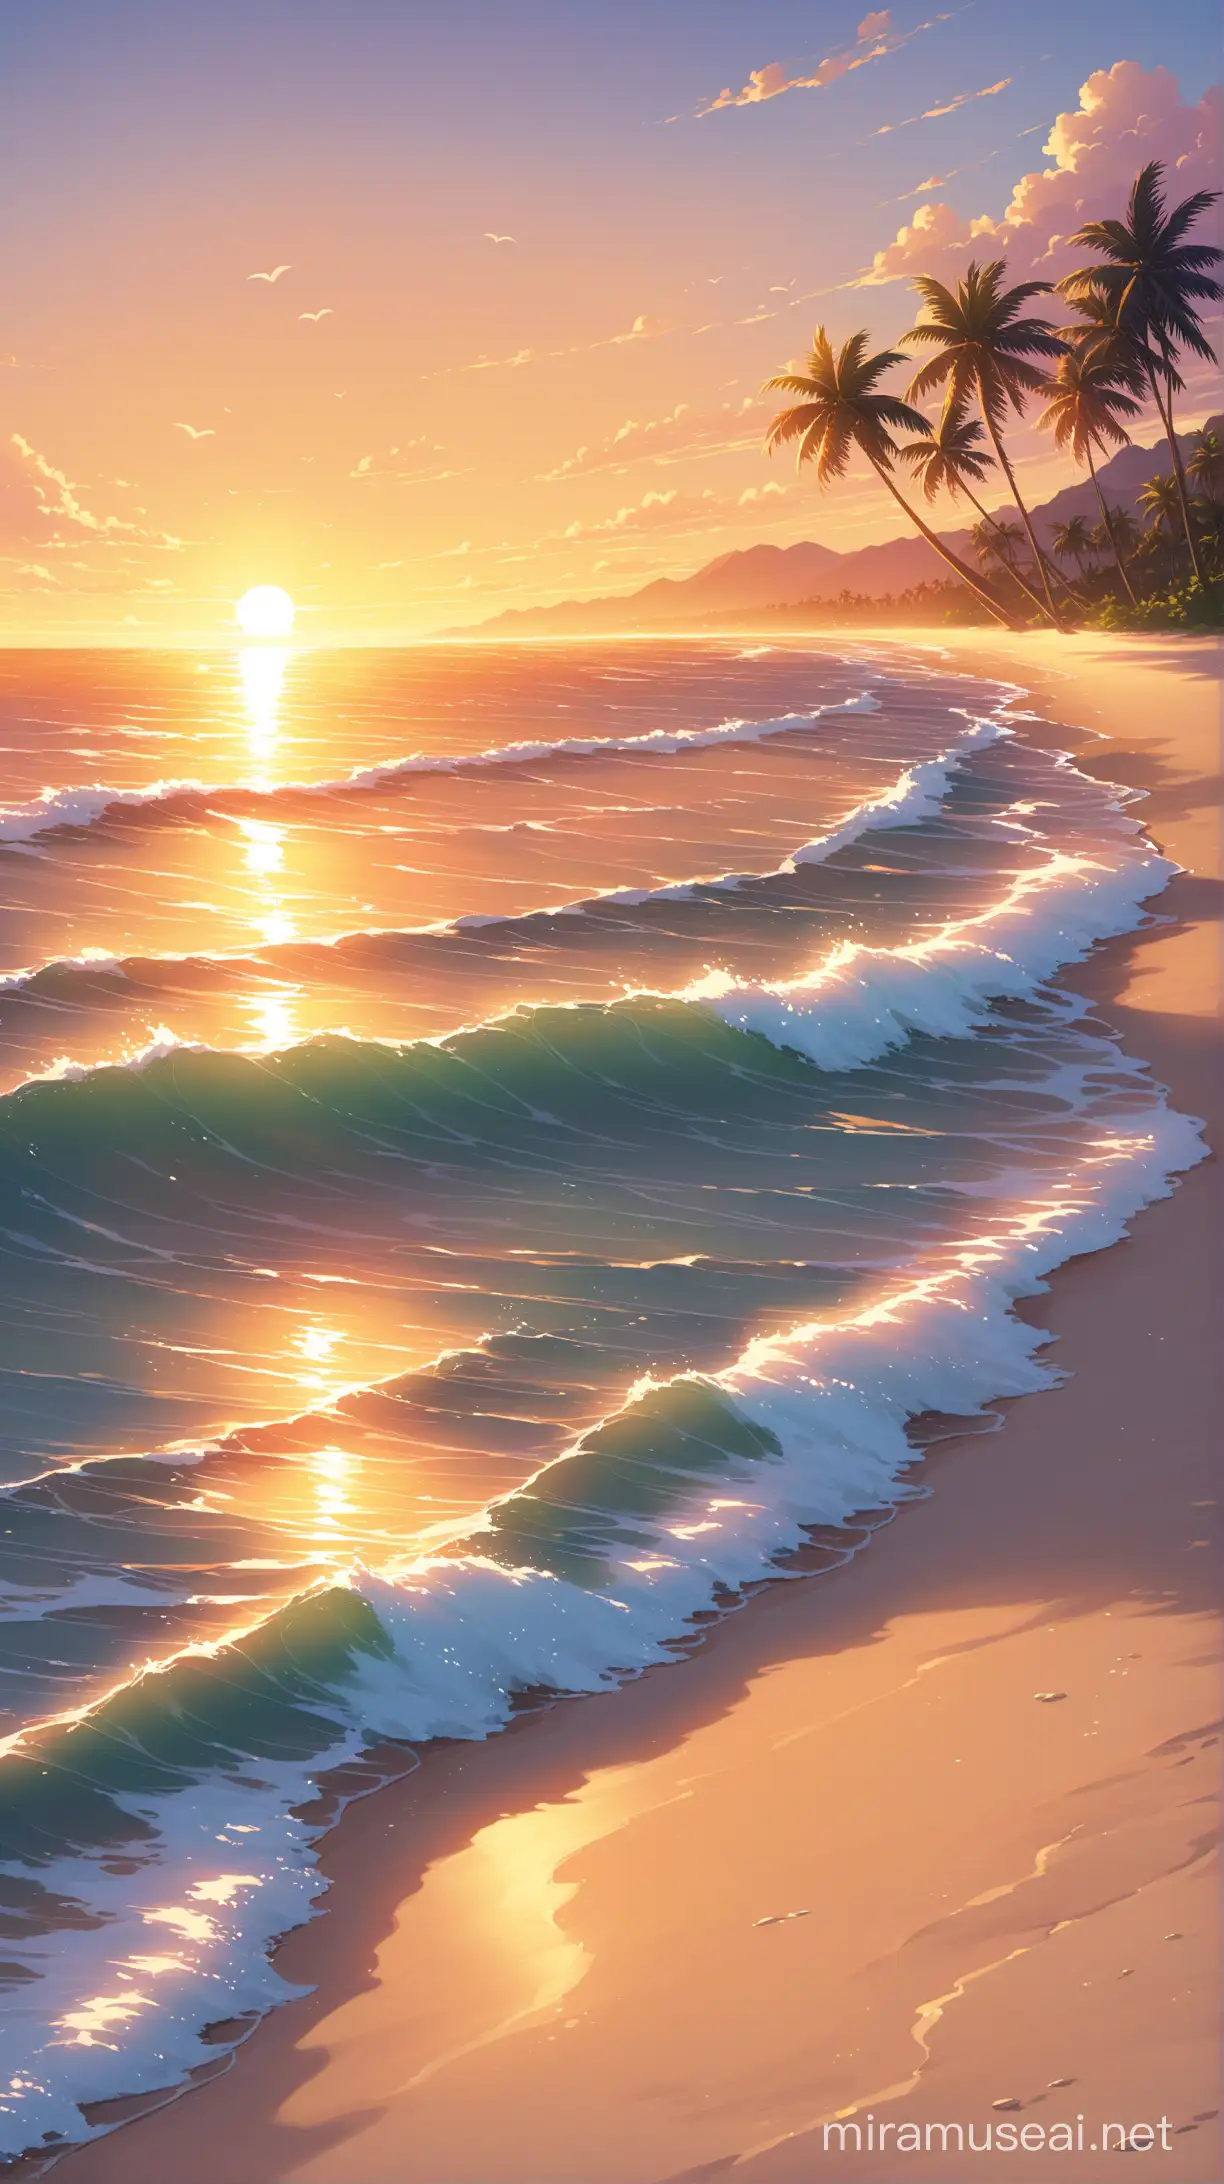 A serene beach at sunset, with palm trees swaying in the breeze and waves crashing gently on the shore.